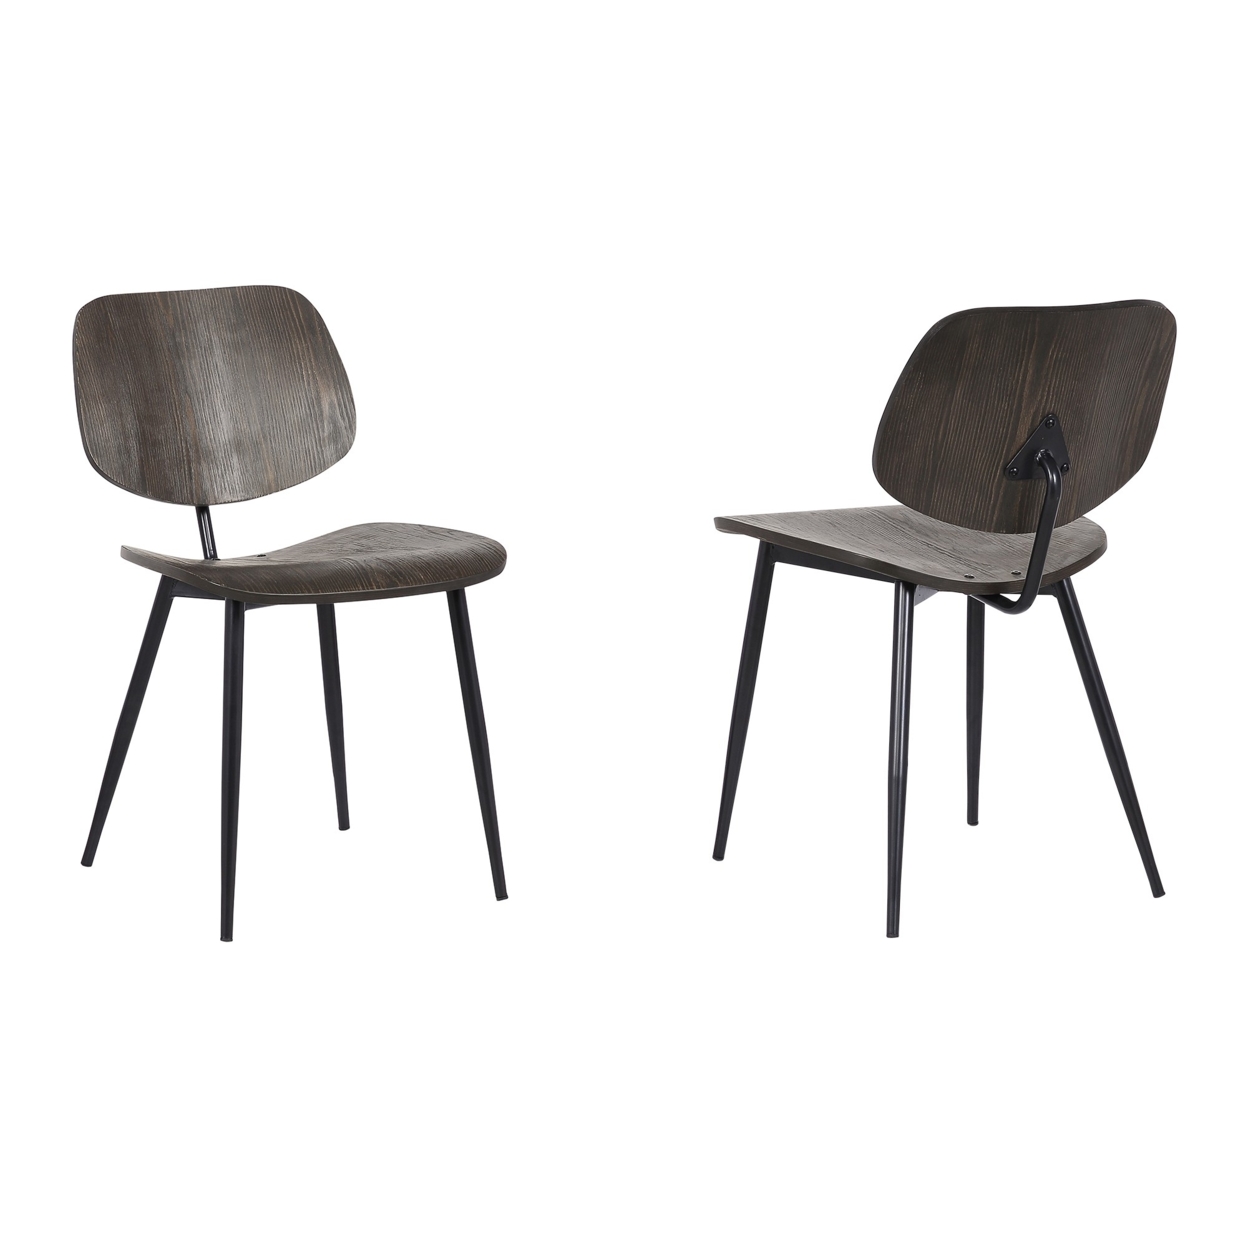 Contemporary Style Dining Accent Chair With Angled Legs, Set Of 2, Brown- Saltoro Sherpi